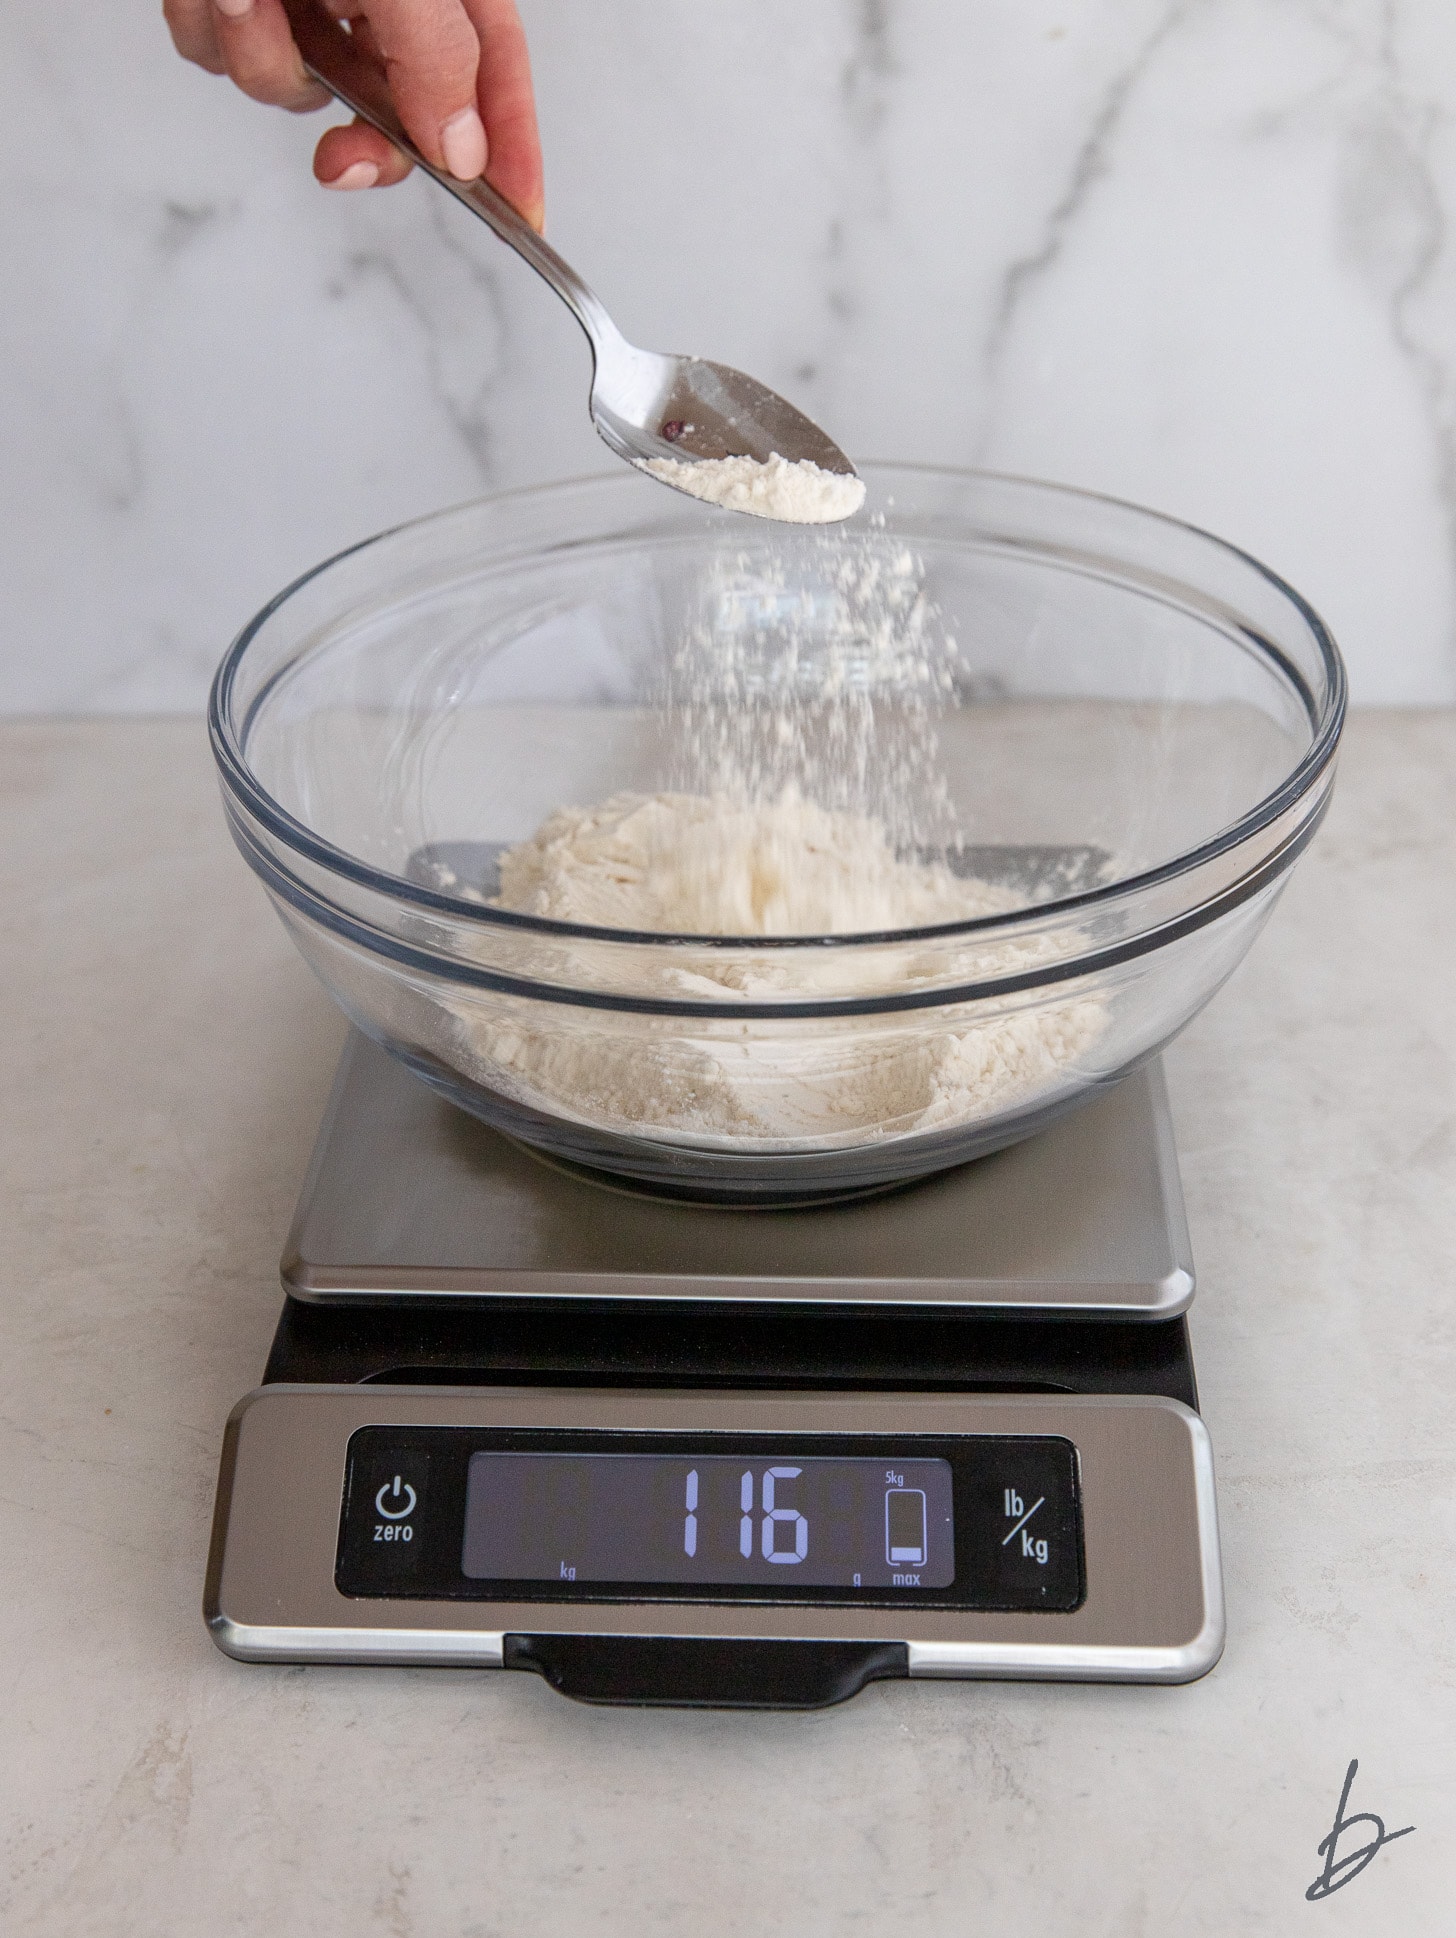 spoon sprinkling flour into a bowl on a kitchen scale.